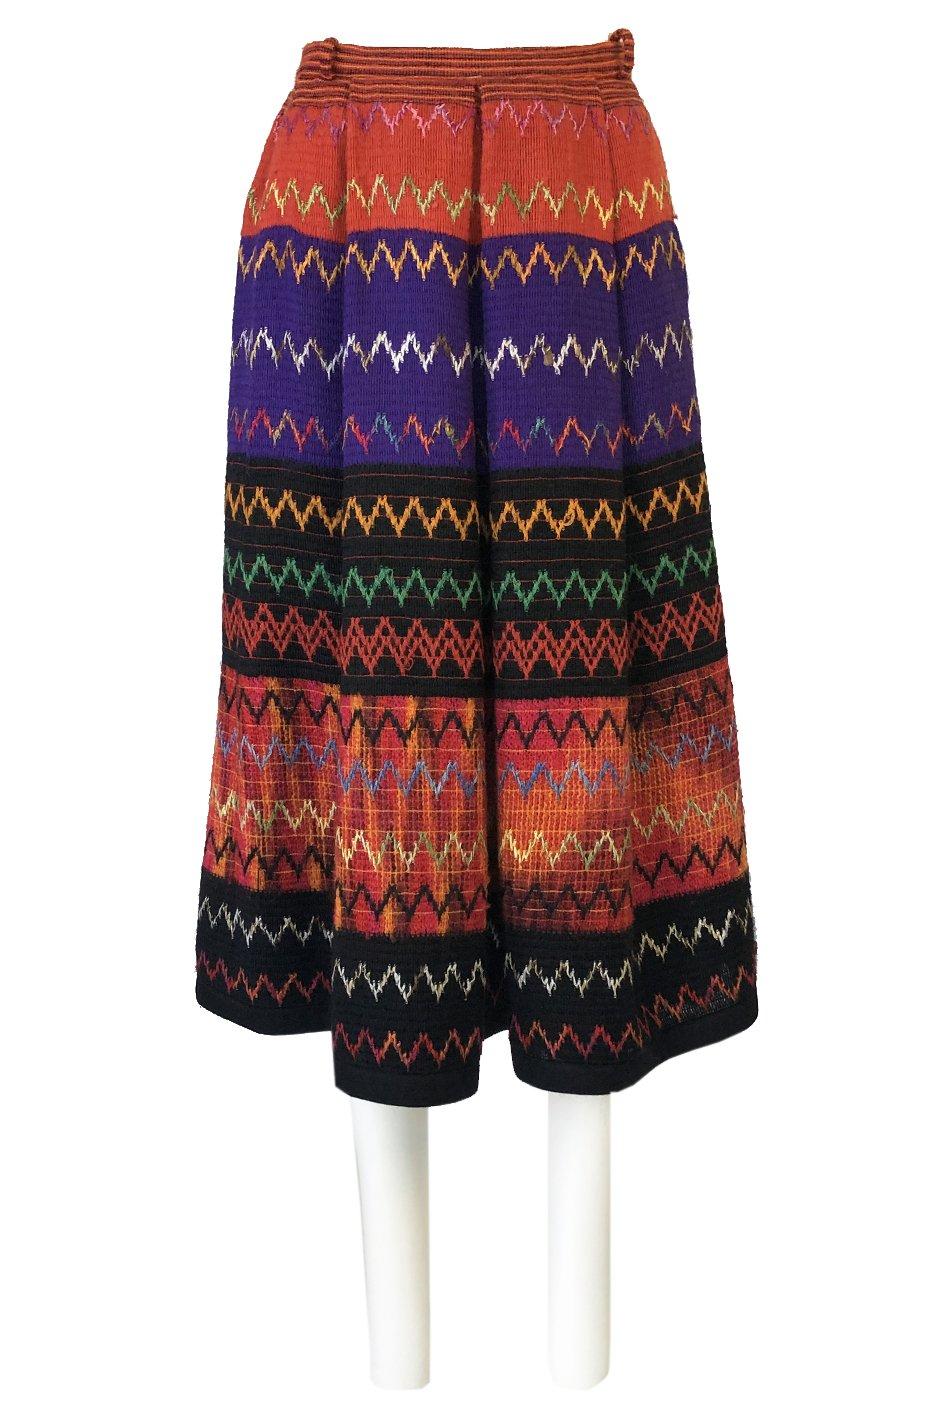 Women's 1970s Lanvin Numbered Haute Couture Hand Woven Knit Embroidery Skirt